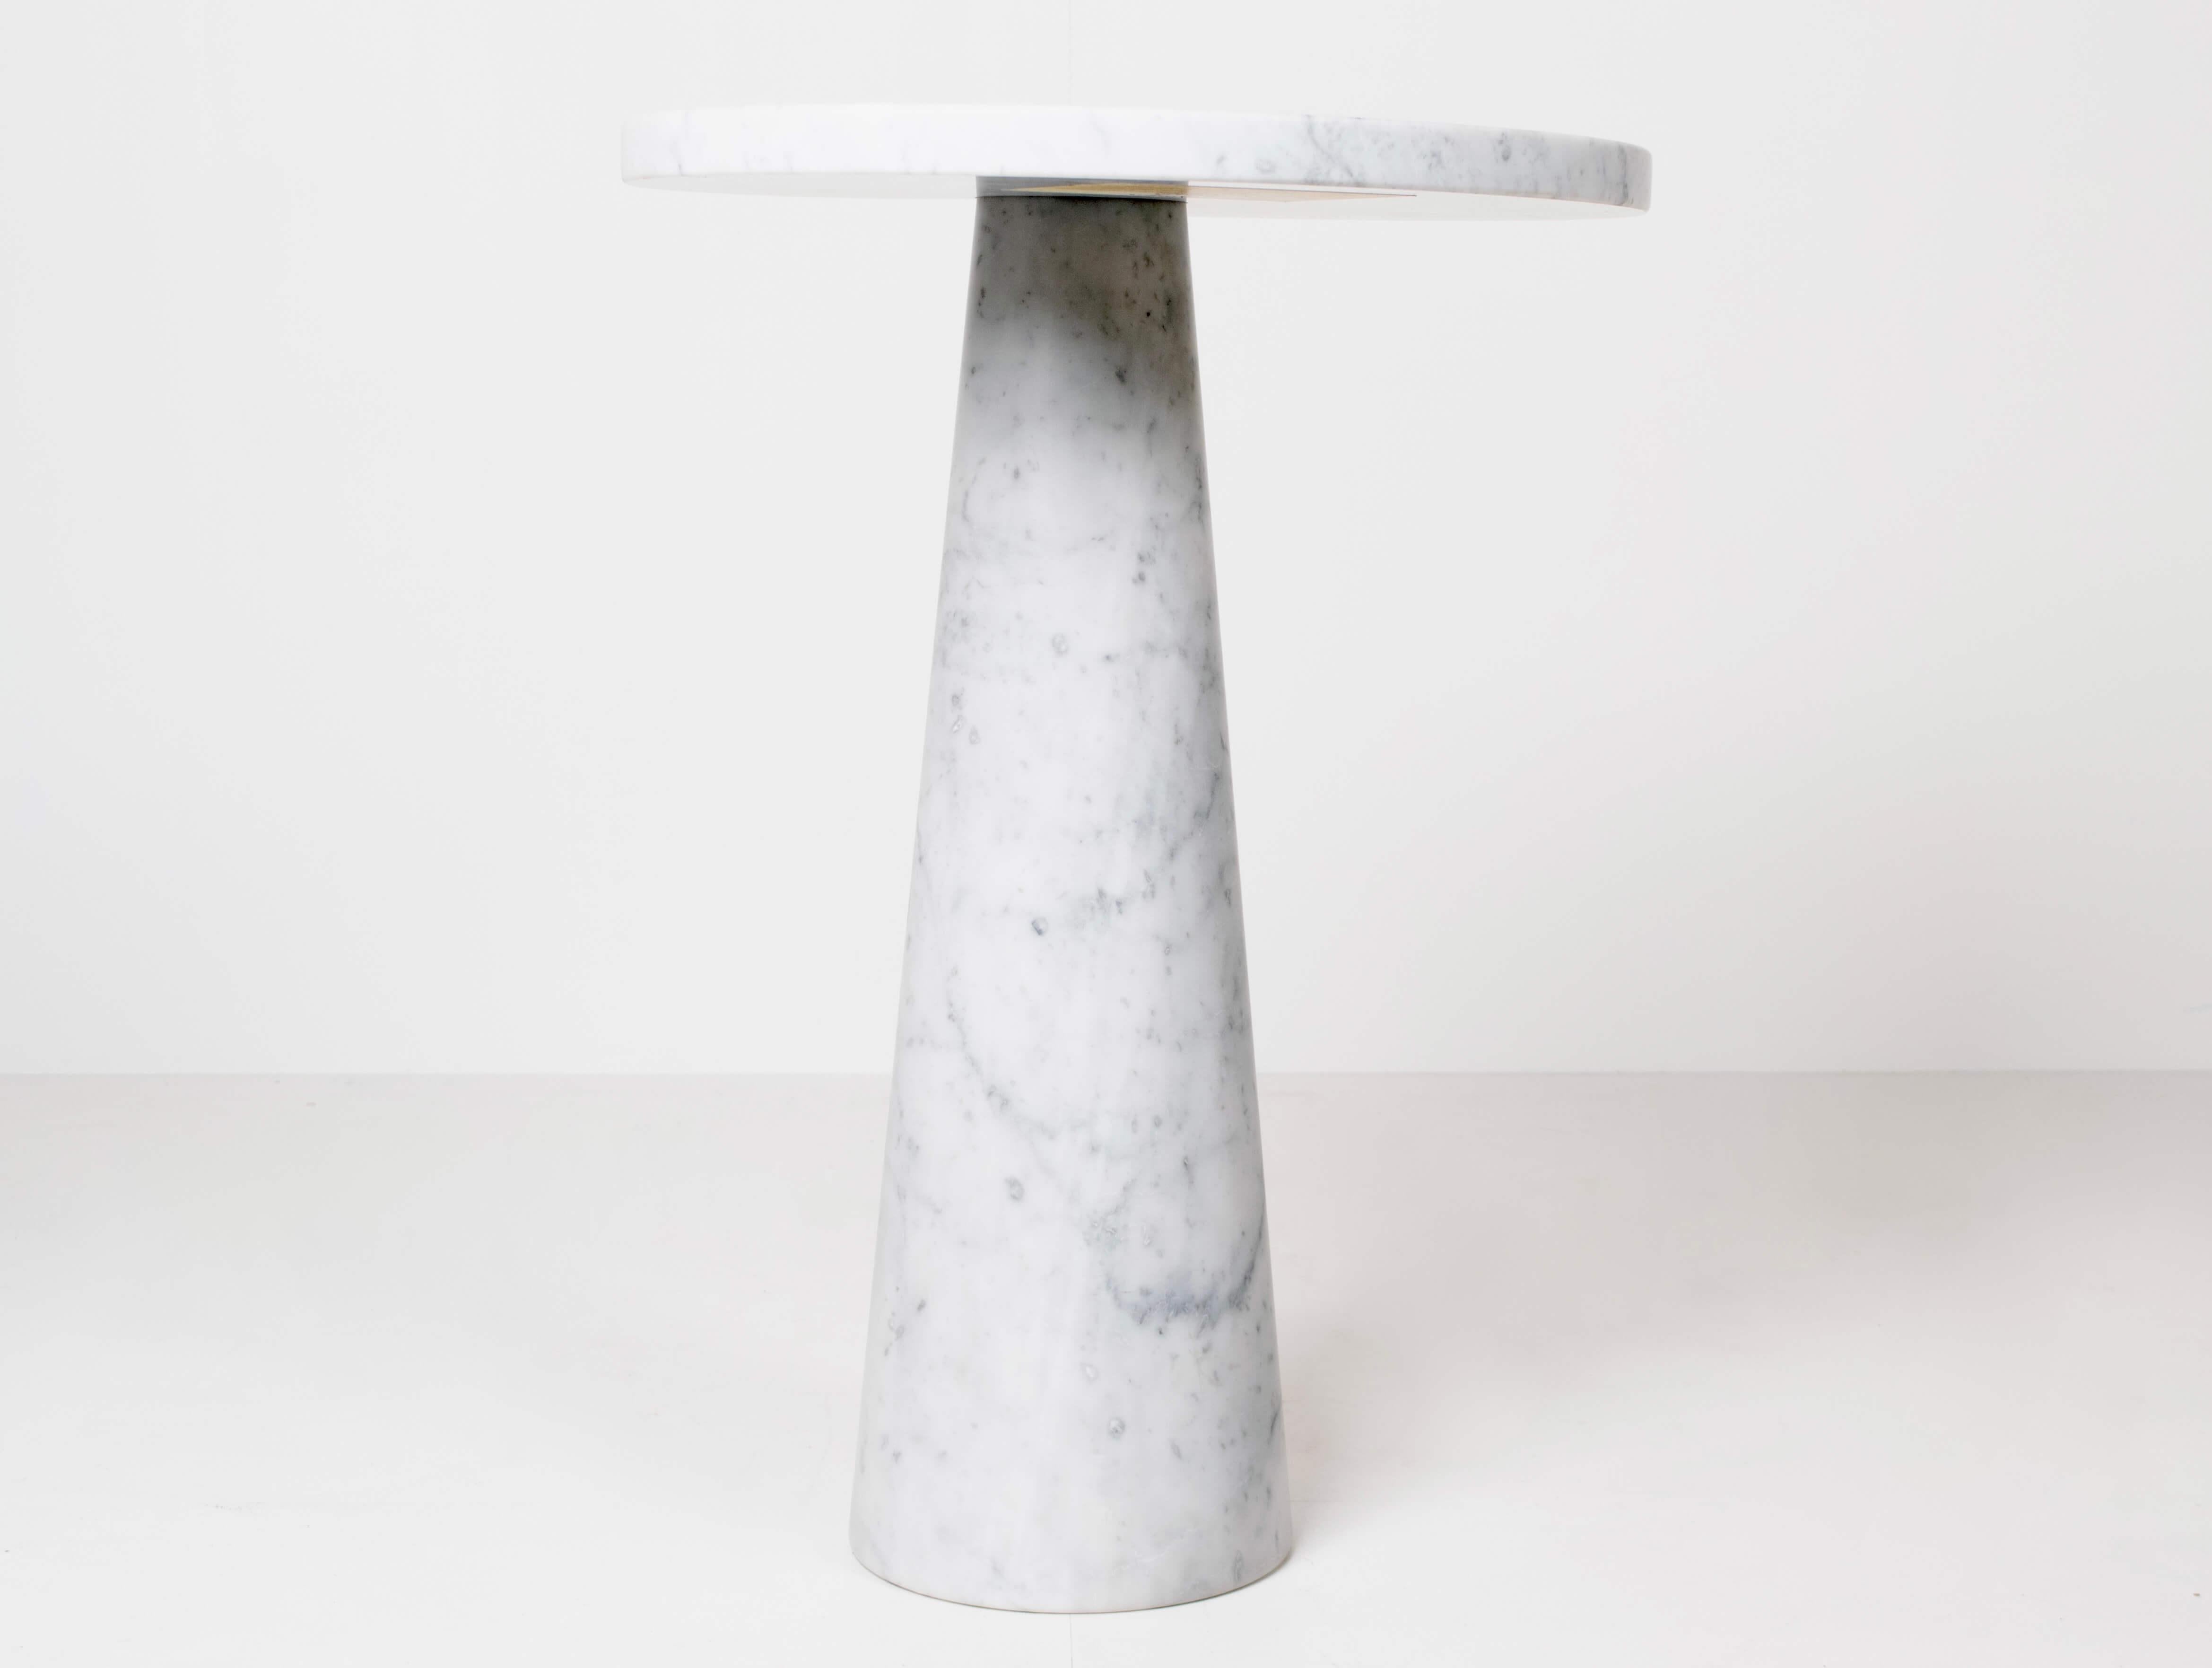 Amazing marble side- or coffee table in Angelo Mangiarotti Style from Italy 1970s. This table made of Carrara marble has the similar design as Angelo Mangiarotti's table designed for Skipper from the 'Eros' series. The table consists of a cone